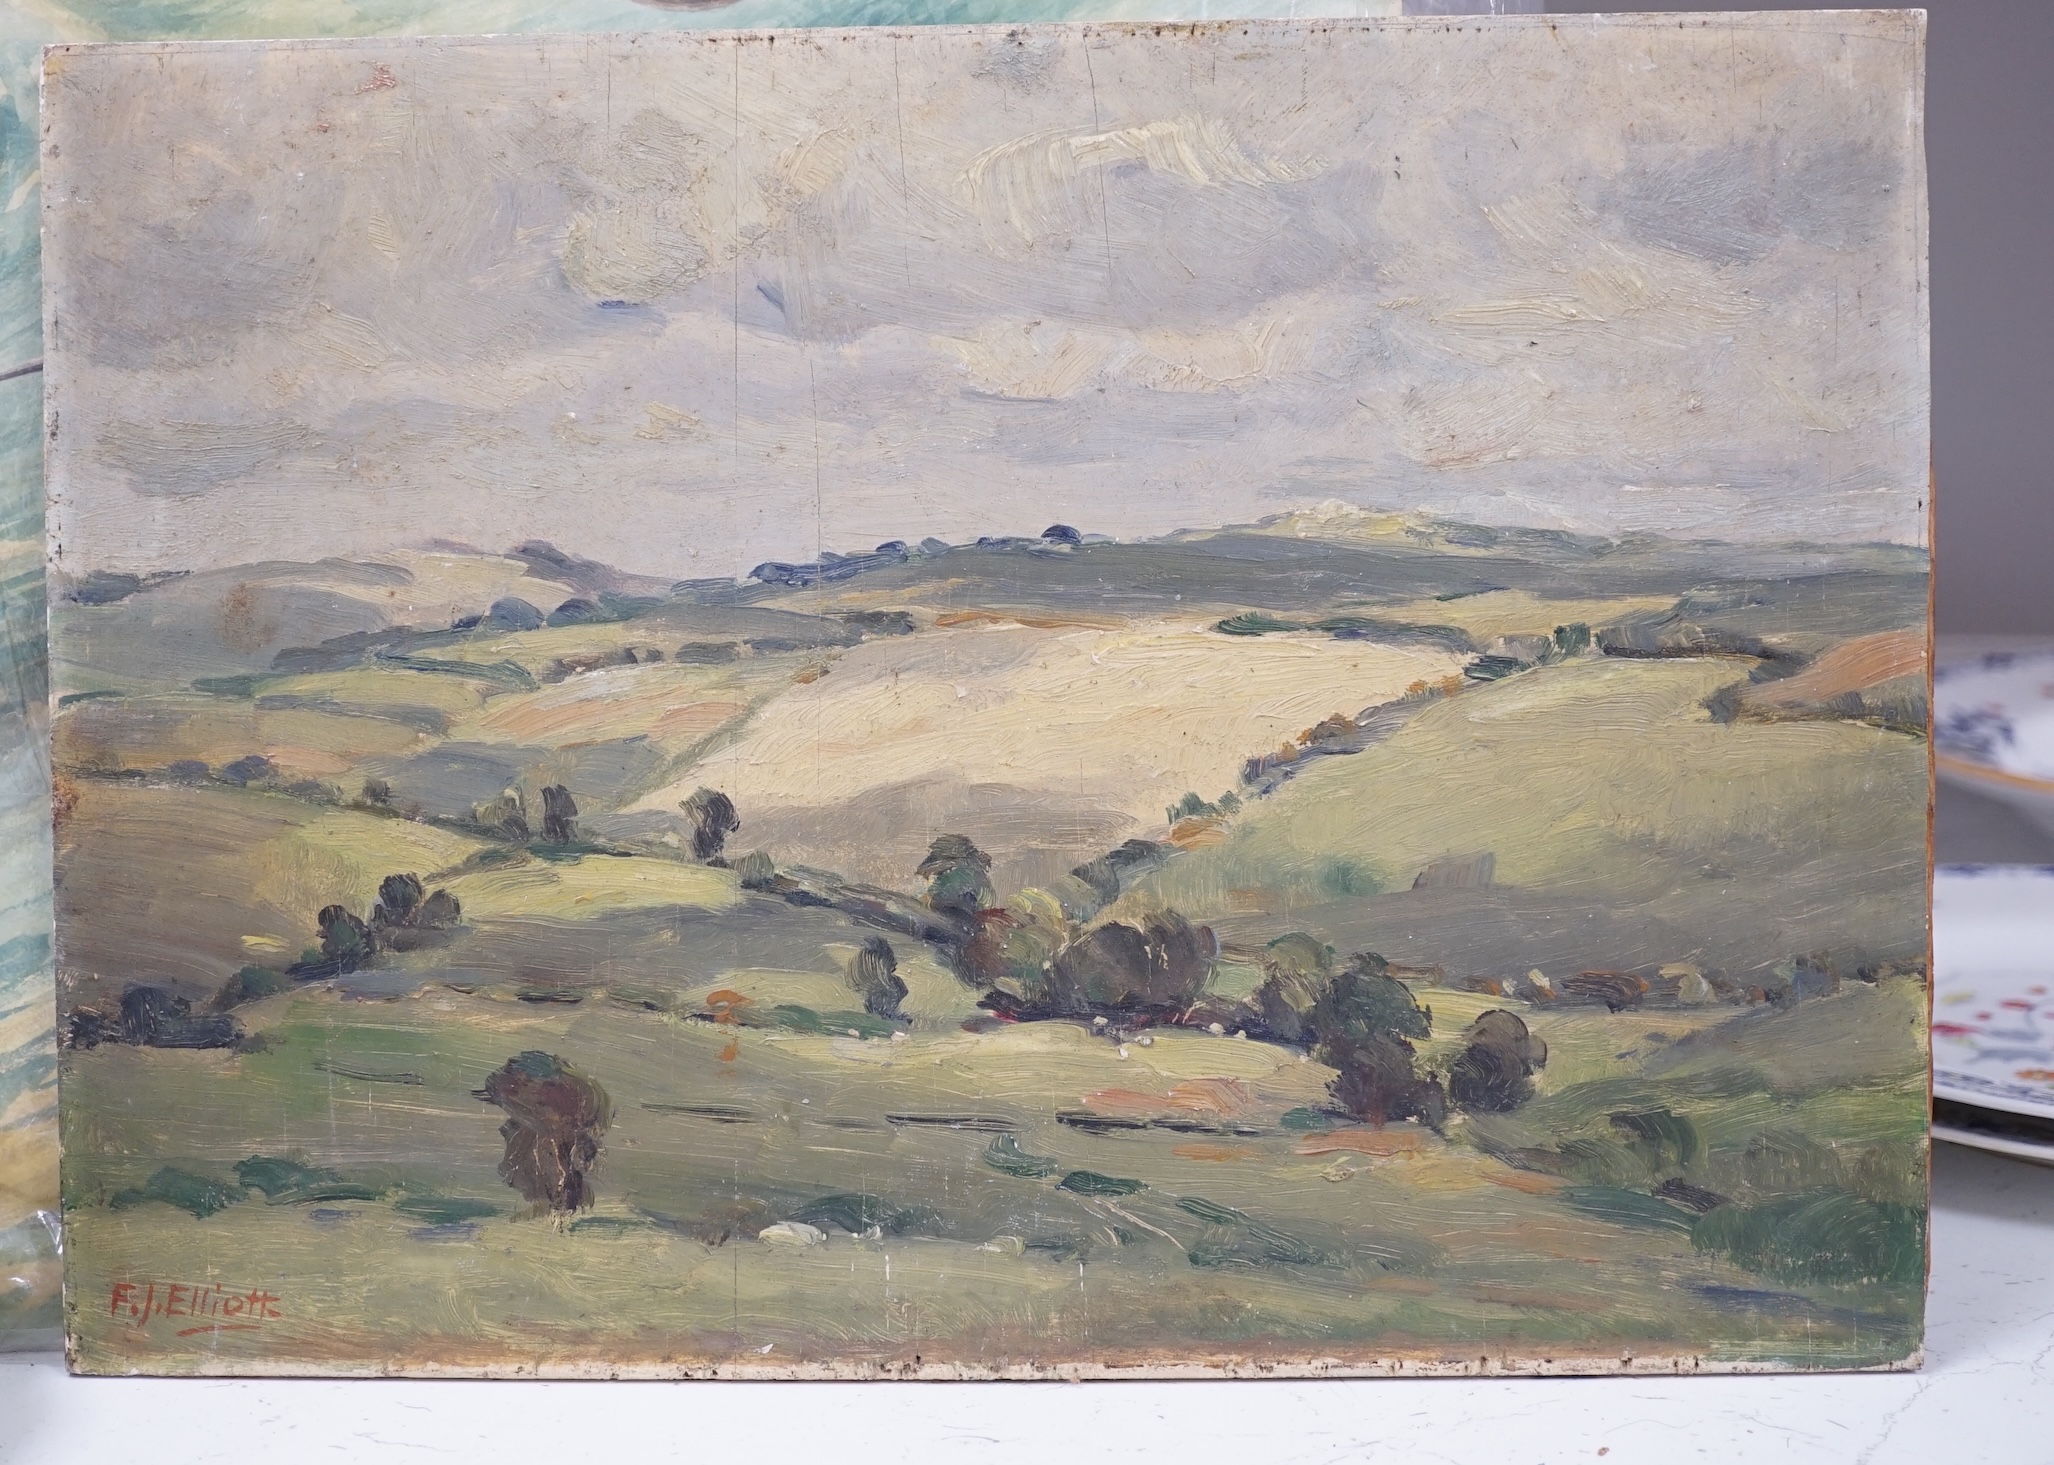 F.J. Elliott (20th. C), oil on board, Rural landscape, signed, unframed, 25 x 35cm. Condition - poor to fair, some cracking and surface dirt